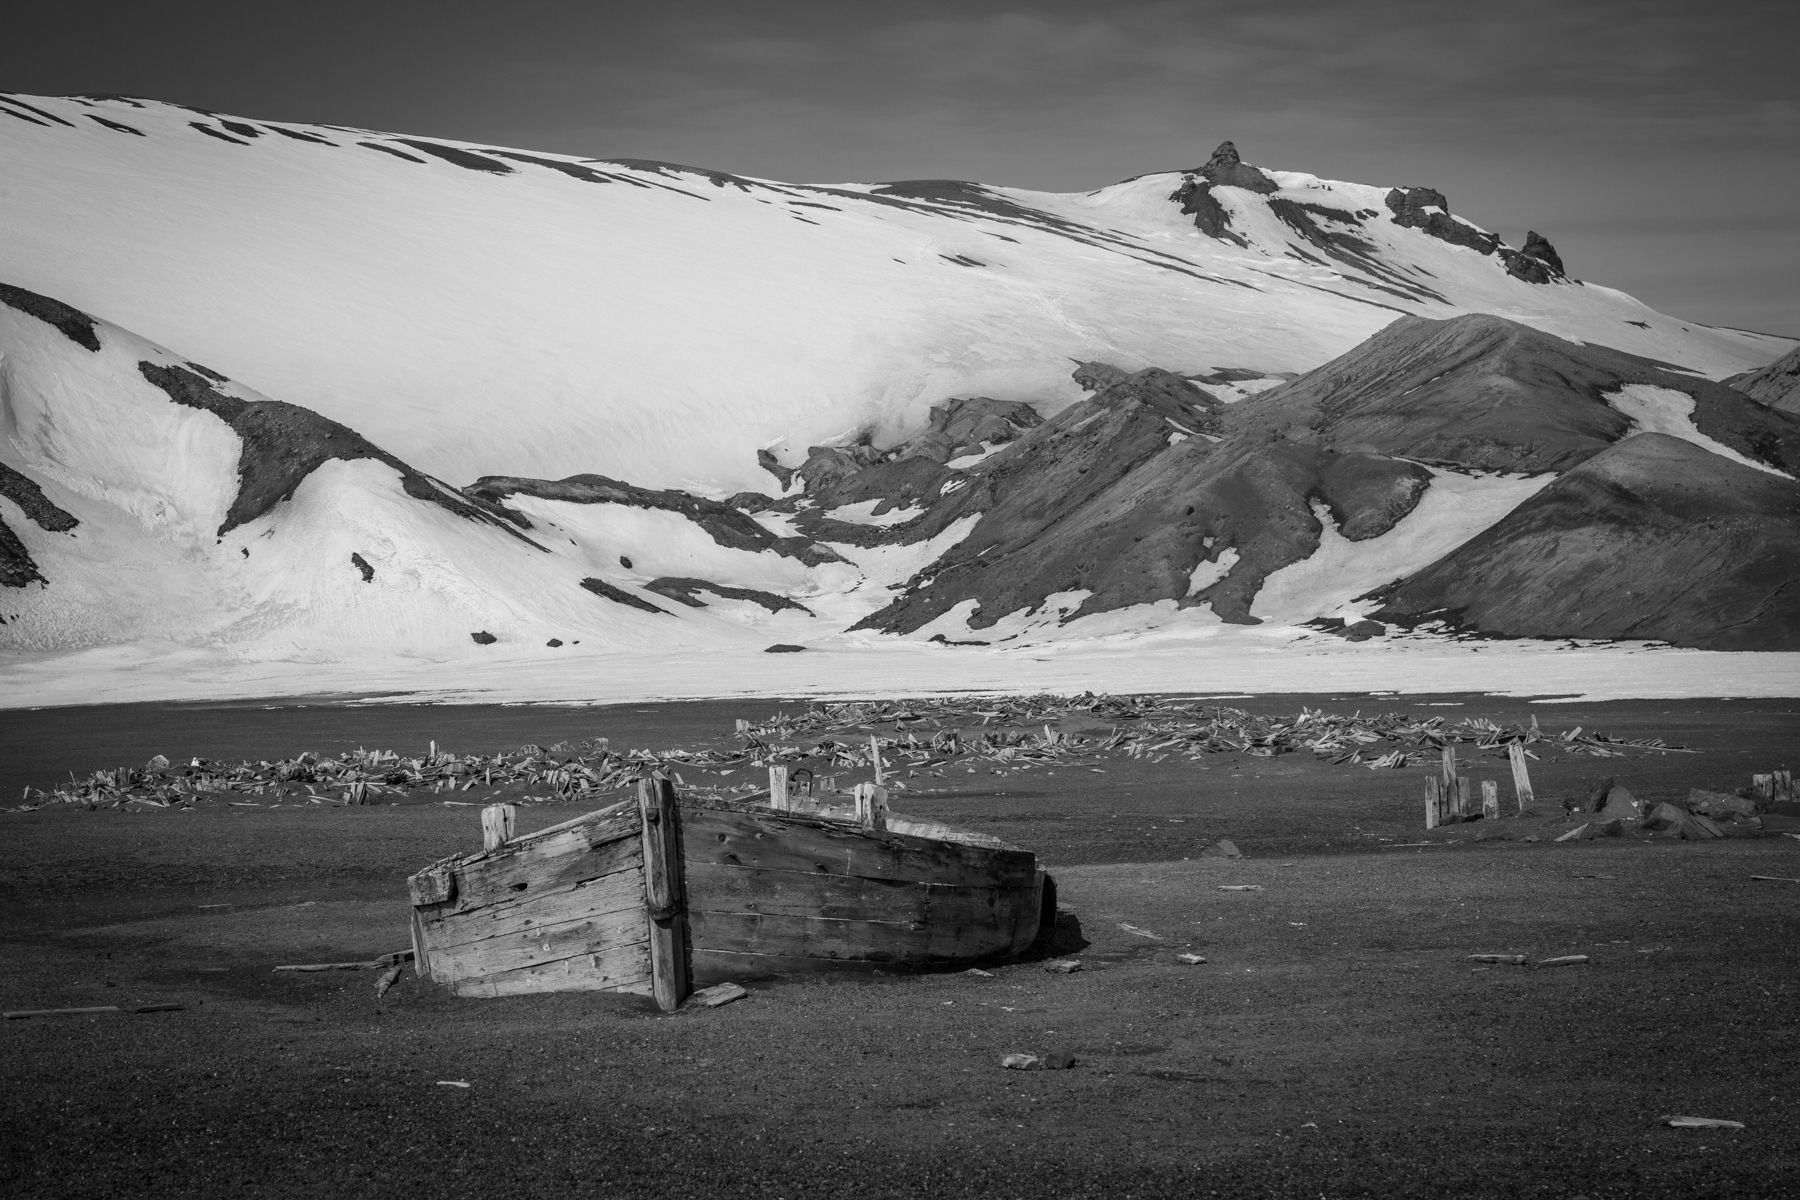 The remains of an old whaling boat on Deception Island, Antarctica